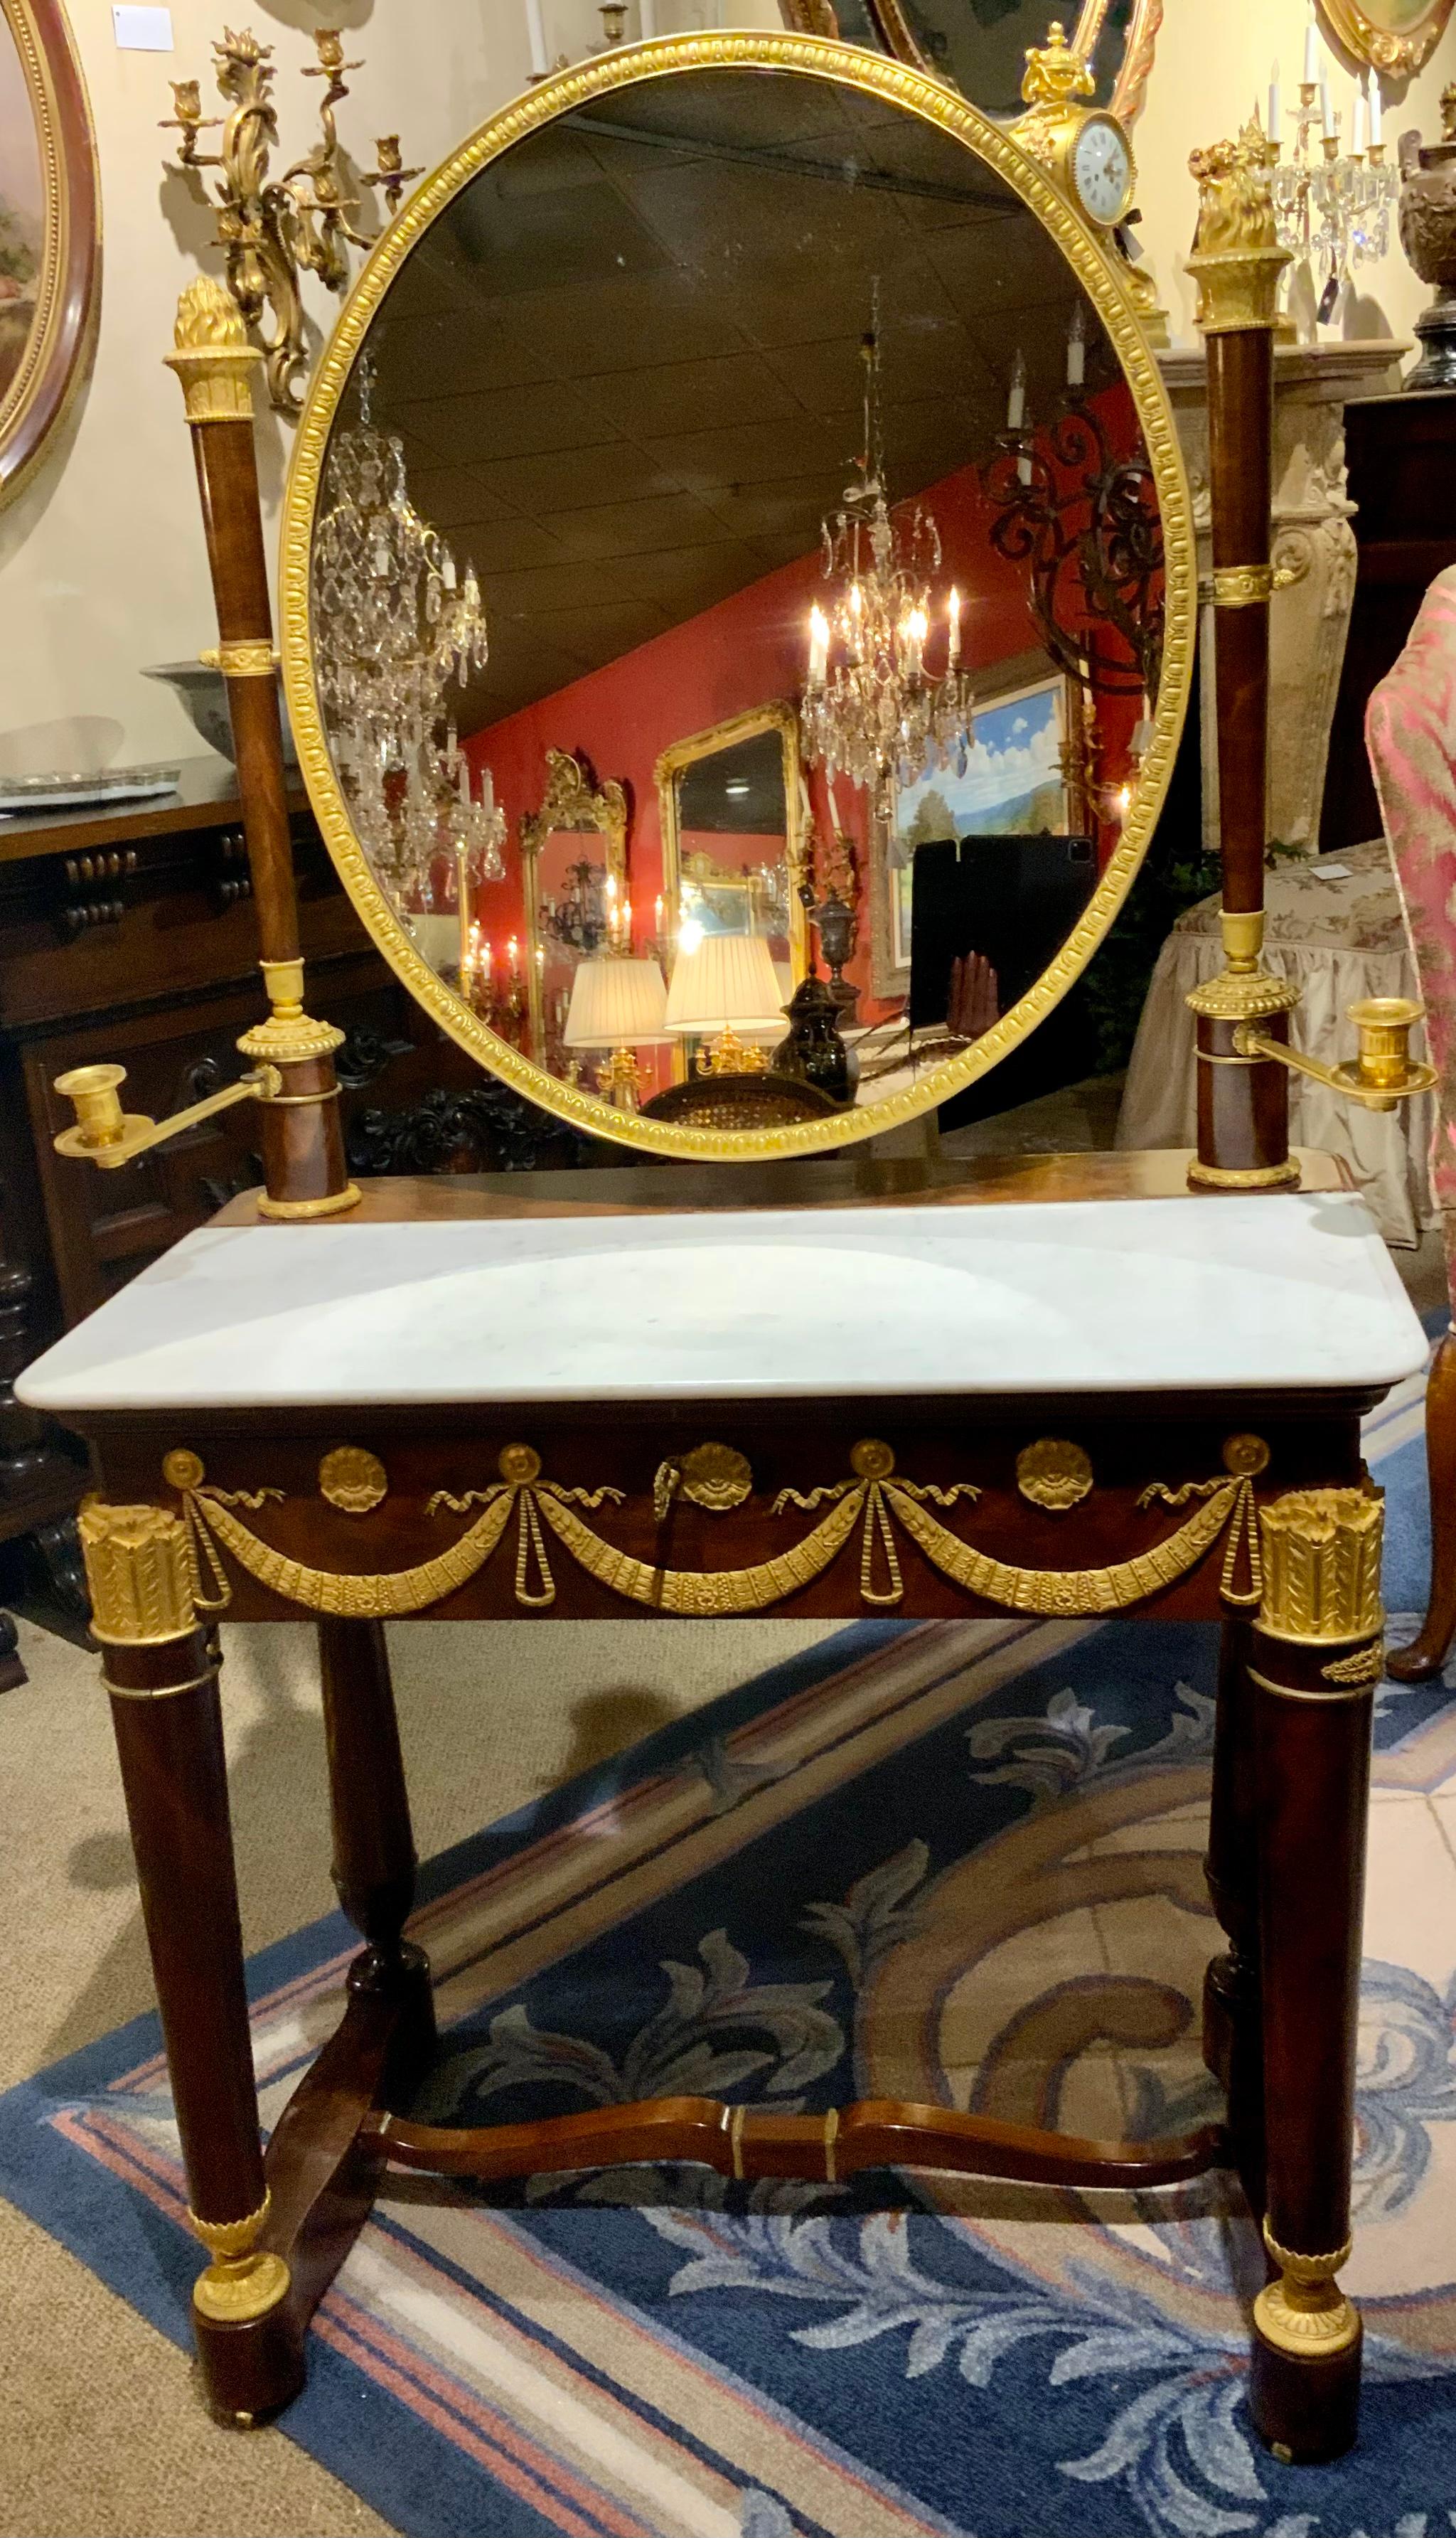 The circular mirror is encased in a bronze frame, supported by columns with 
A bronze dore flame capitals and swiveling candle arms, on a base with a
Dished white marble top over a swag mounted frieze drawer, raised on columns joined by an H form-